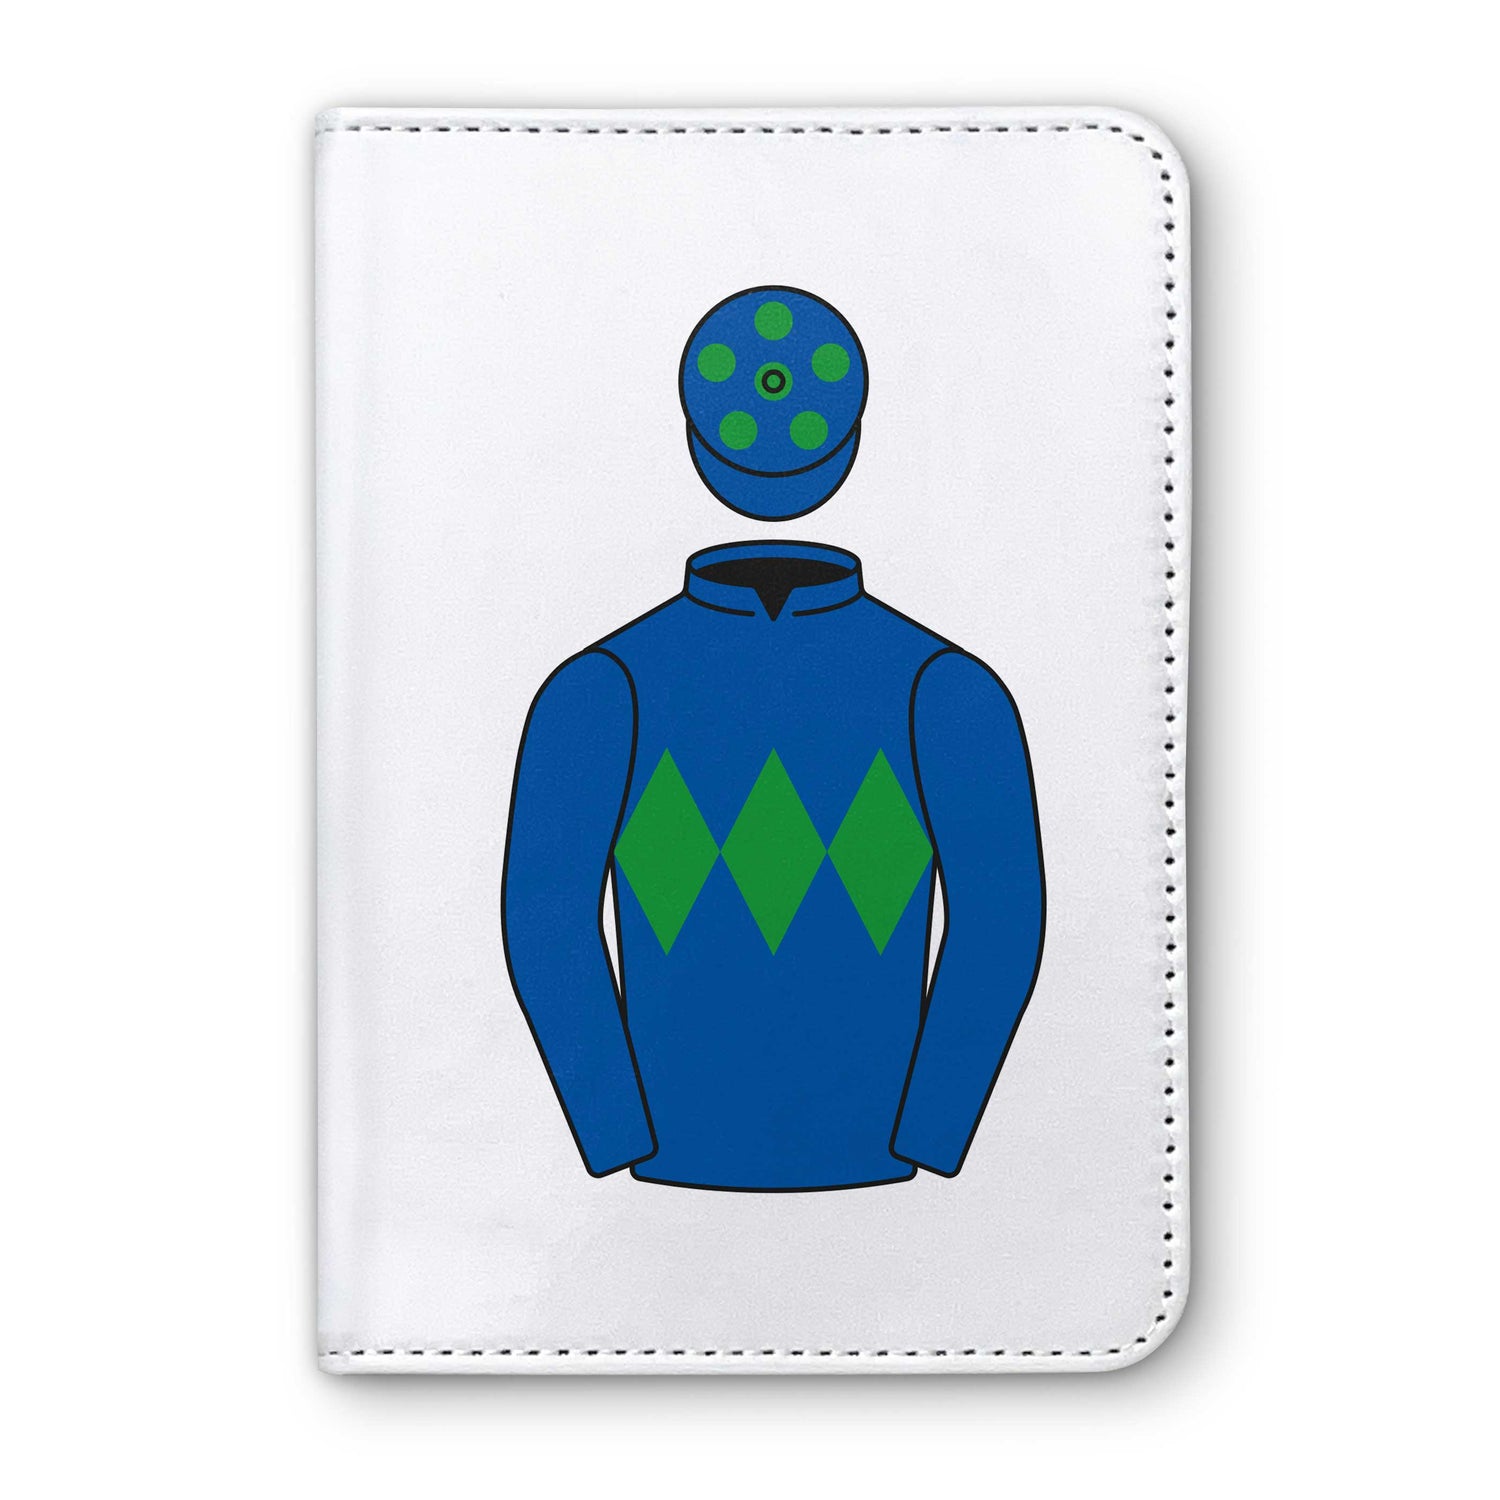 George Creighton Horse Racing Passport Holder - Hacked Up Horse Racing Gifts